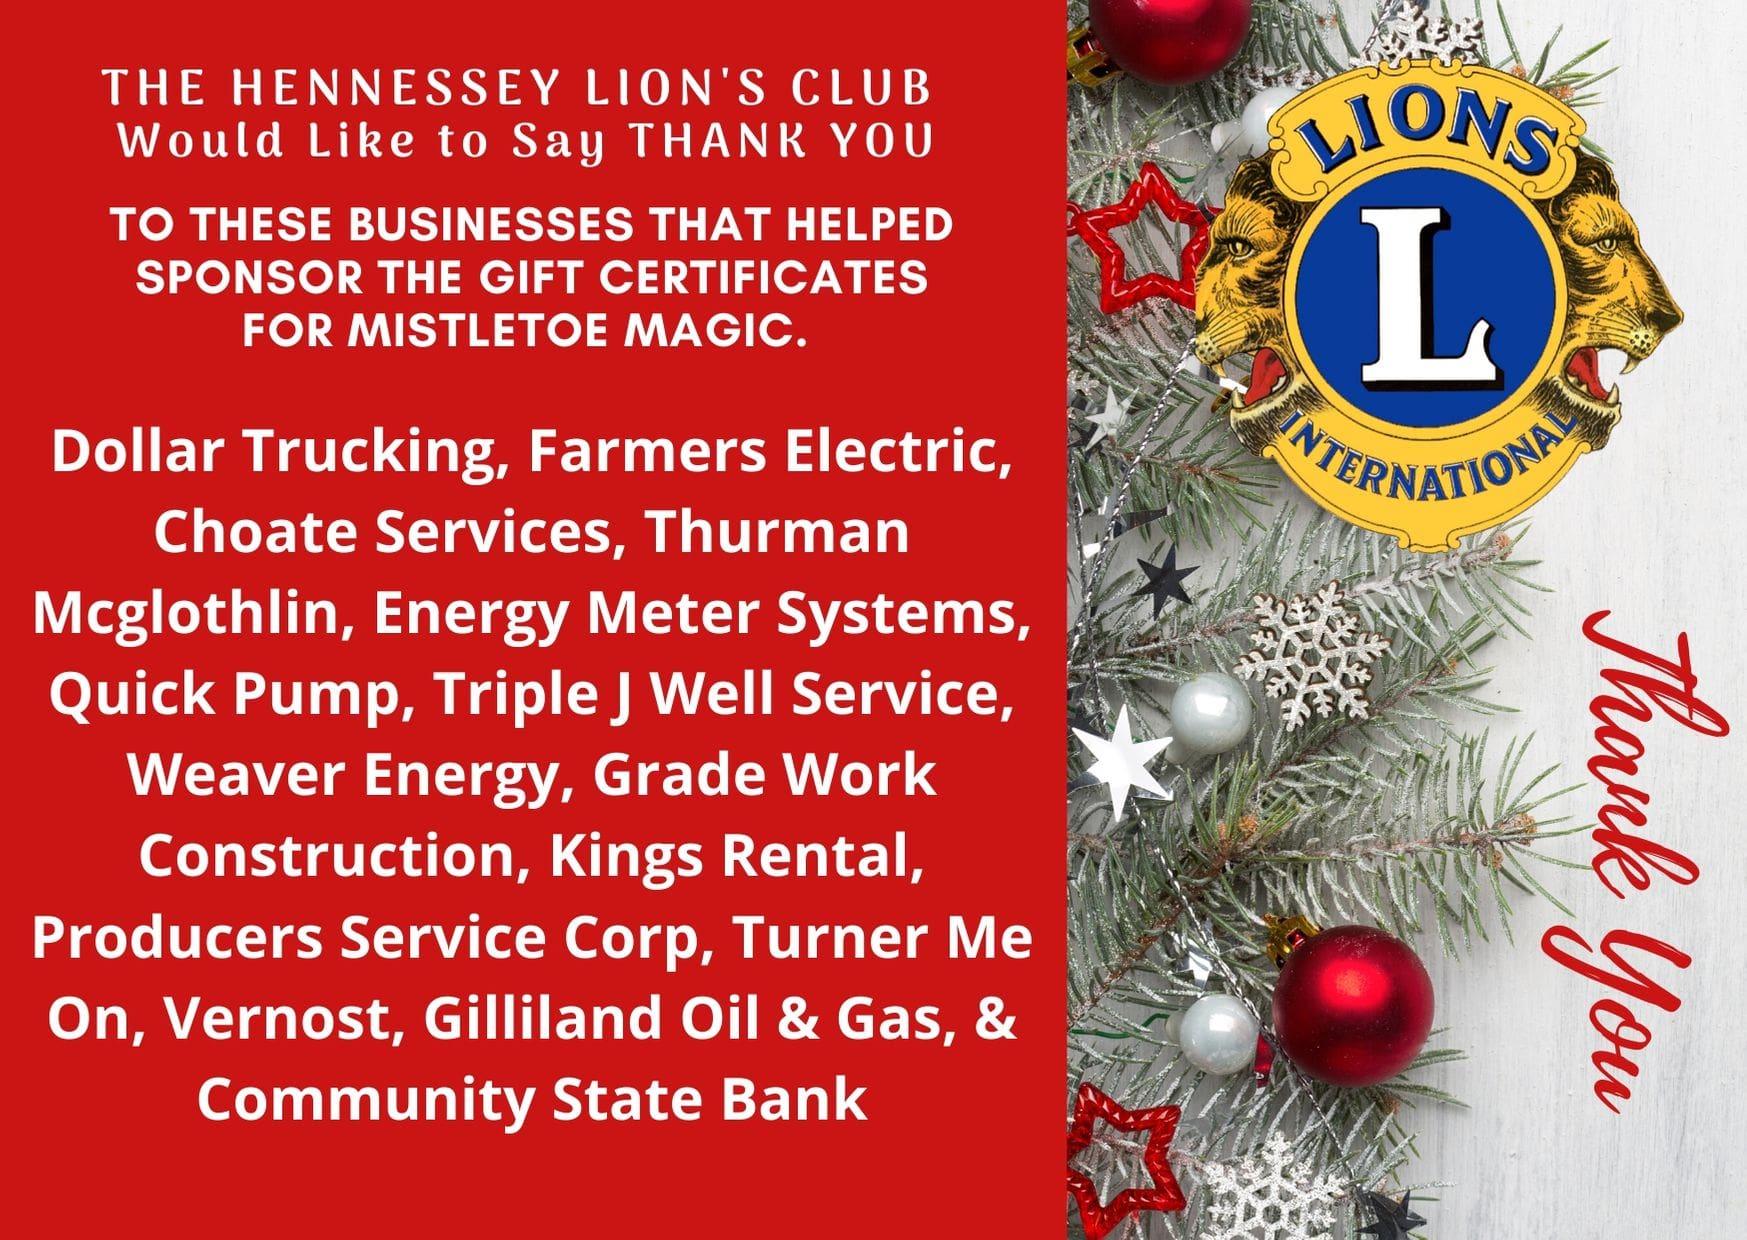 THANK YOU FROM THE HENNESSEY LION’S CLUB